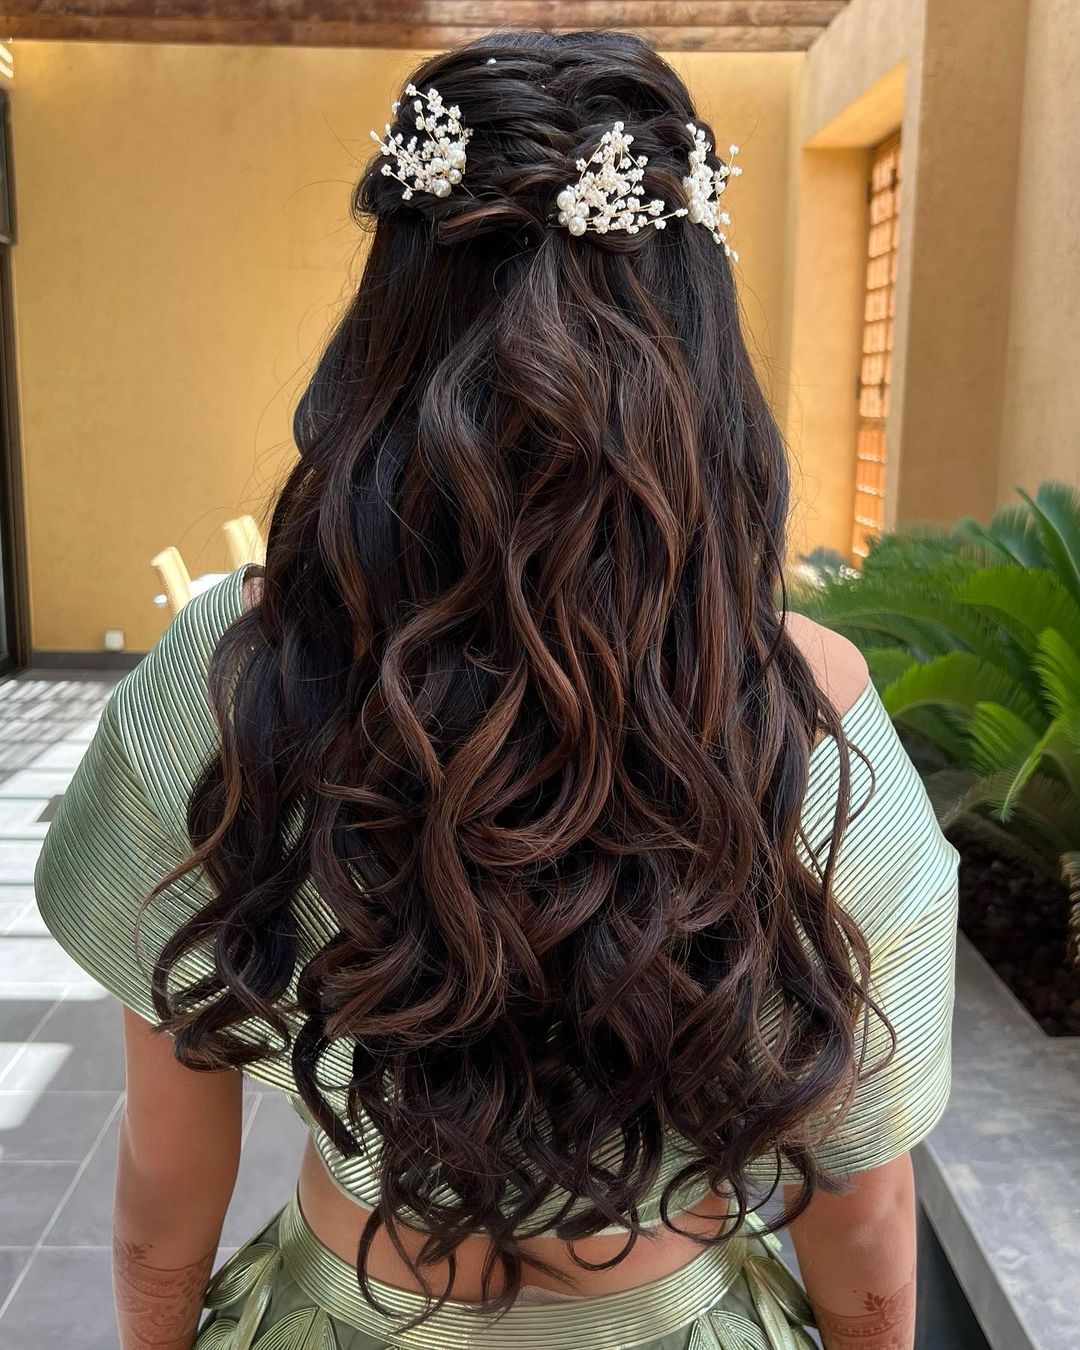 half-up braided waves with flowers on long brown hair